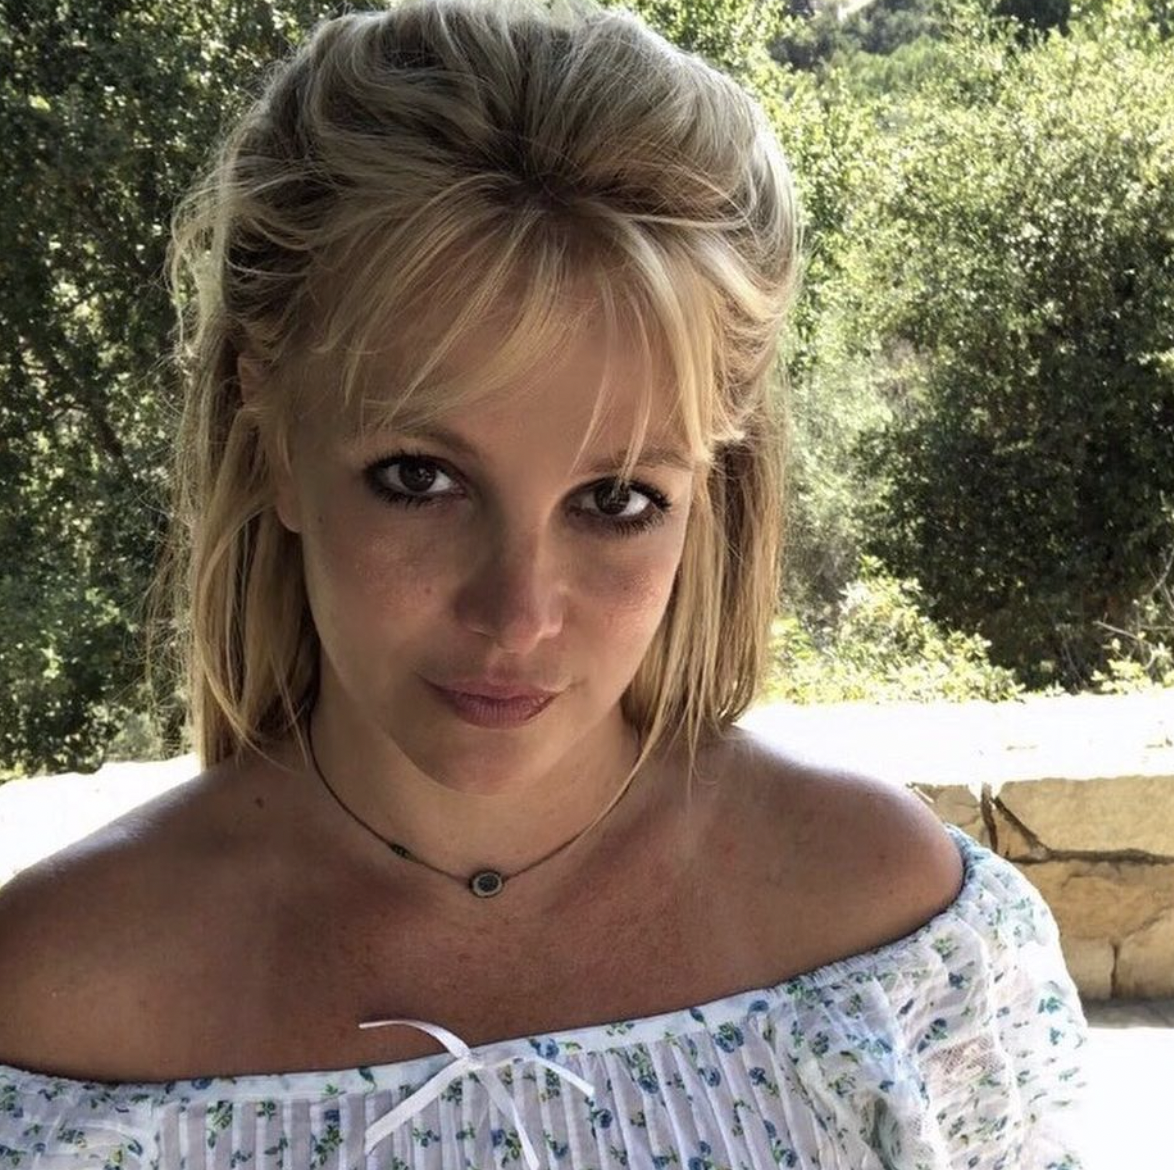 Britney Spears Just Clarified All Those Wedding Reports About Her Brother